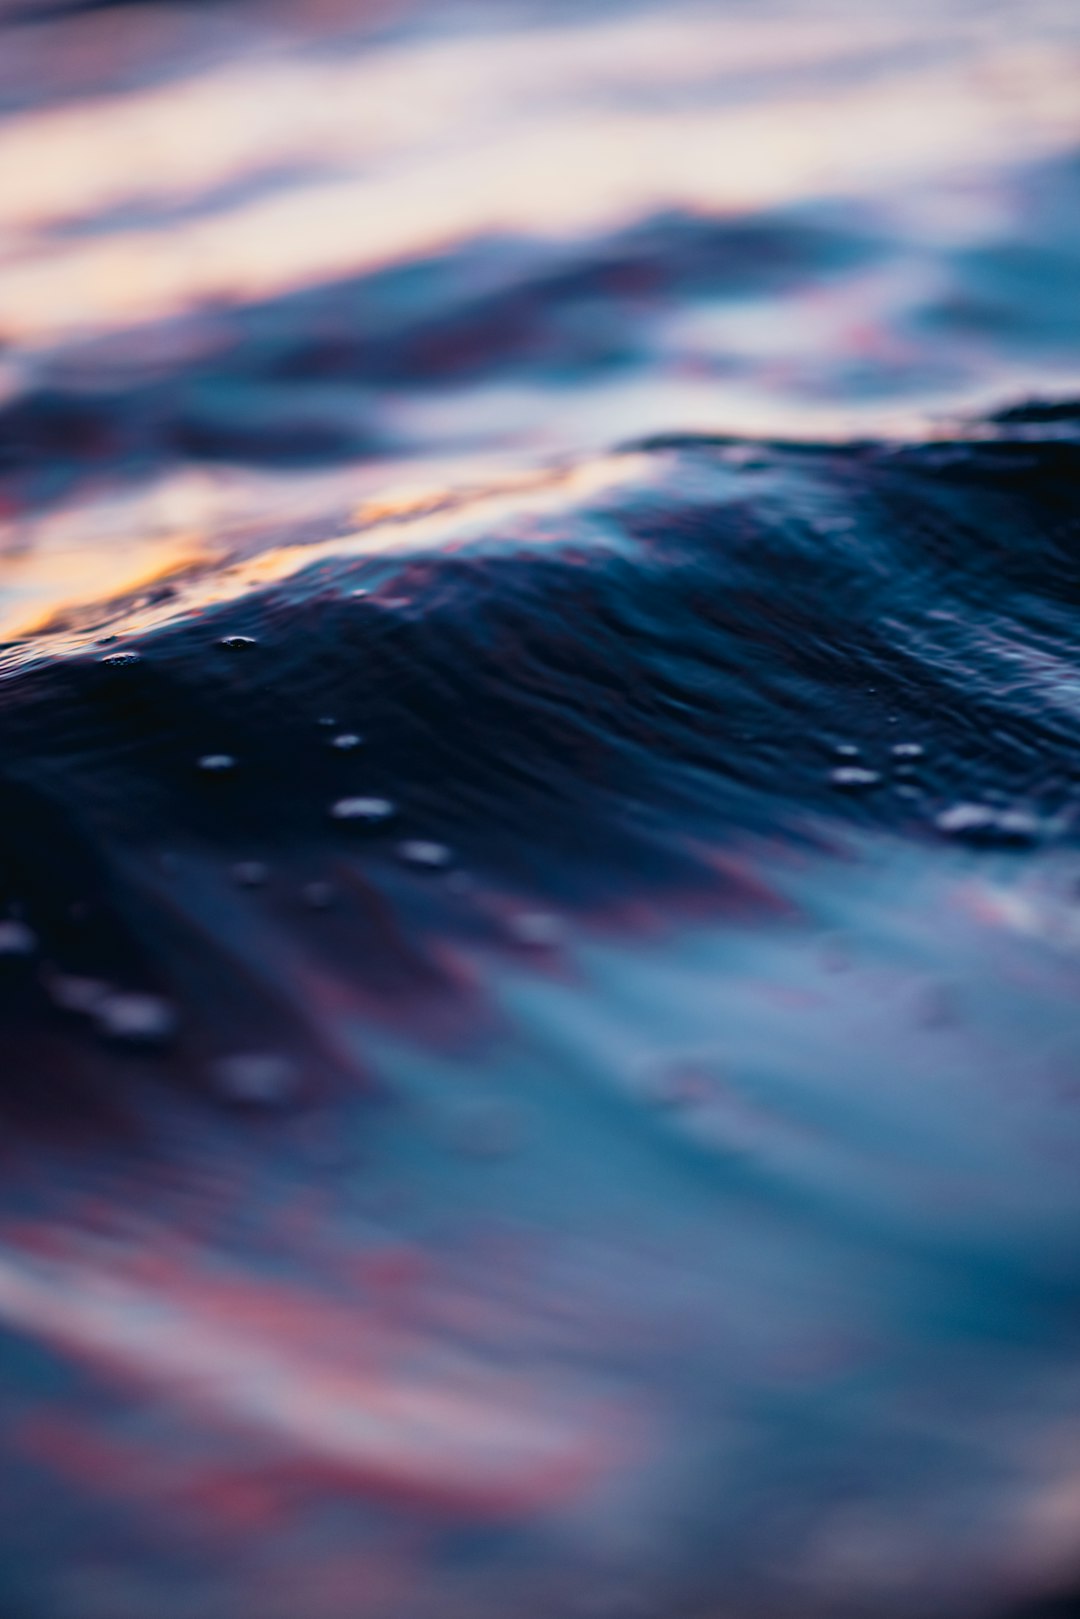 water wave in close up photography